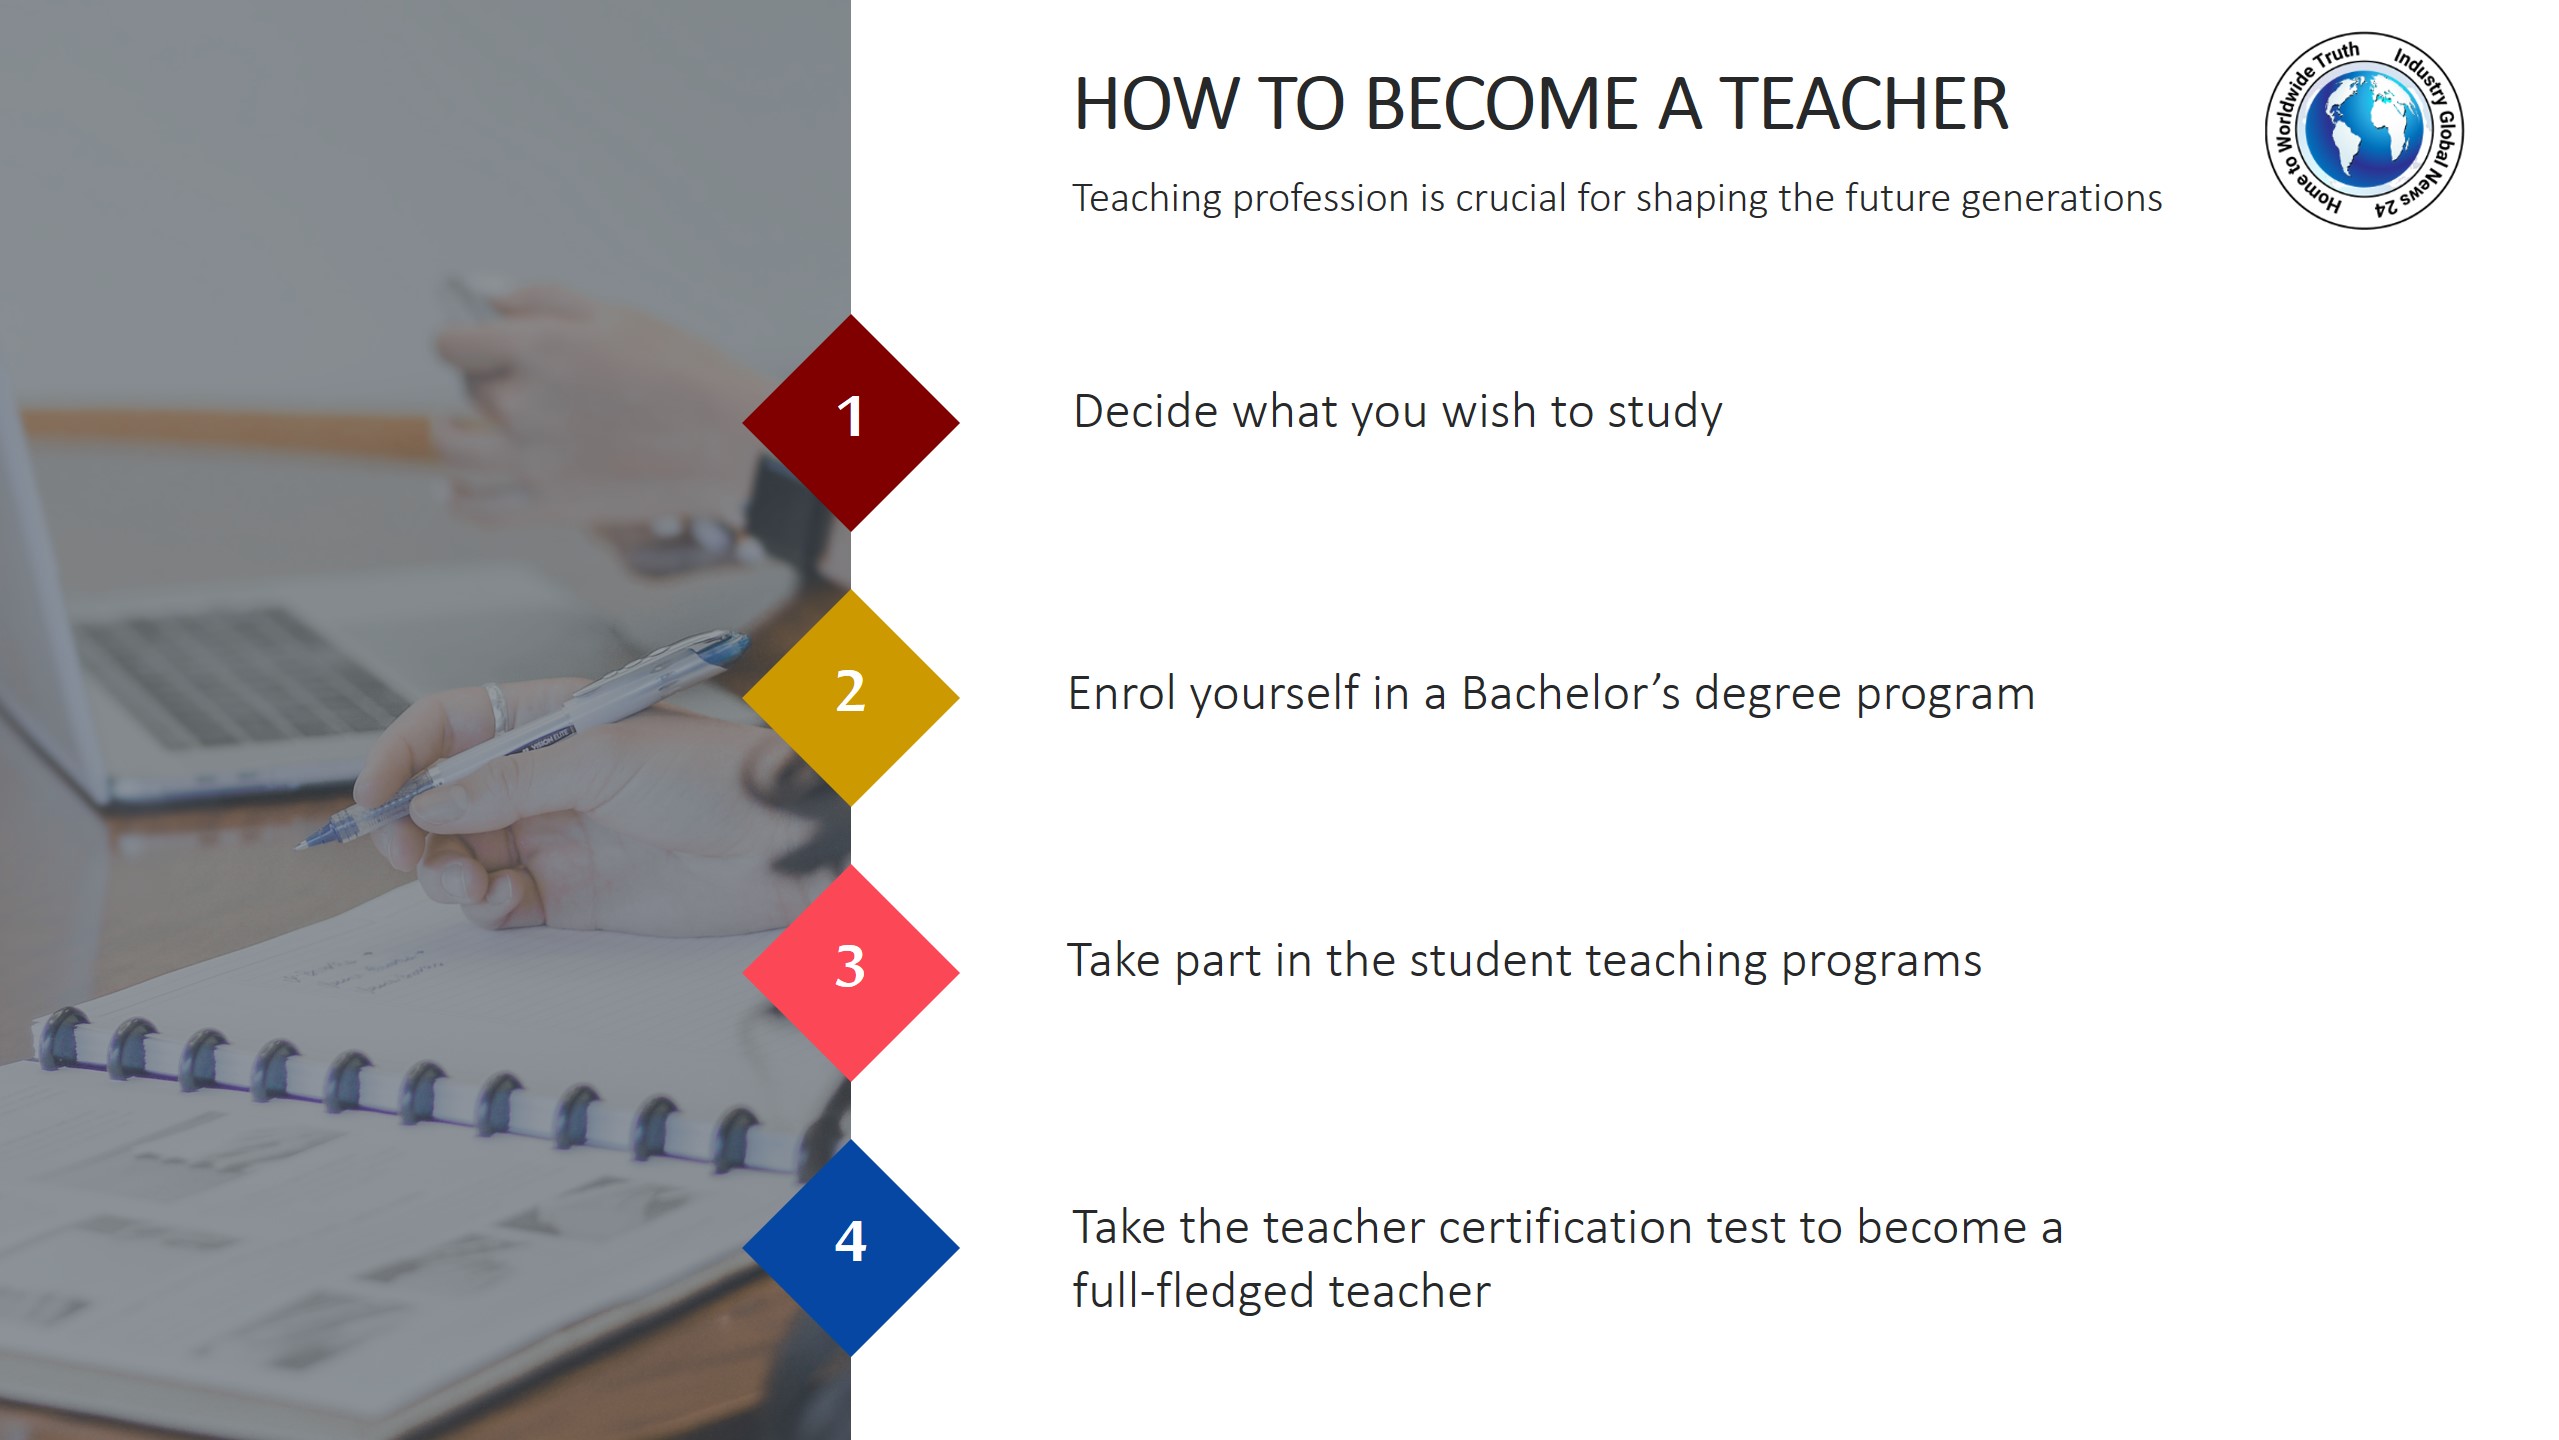 How to become a teacher